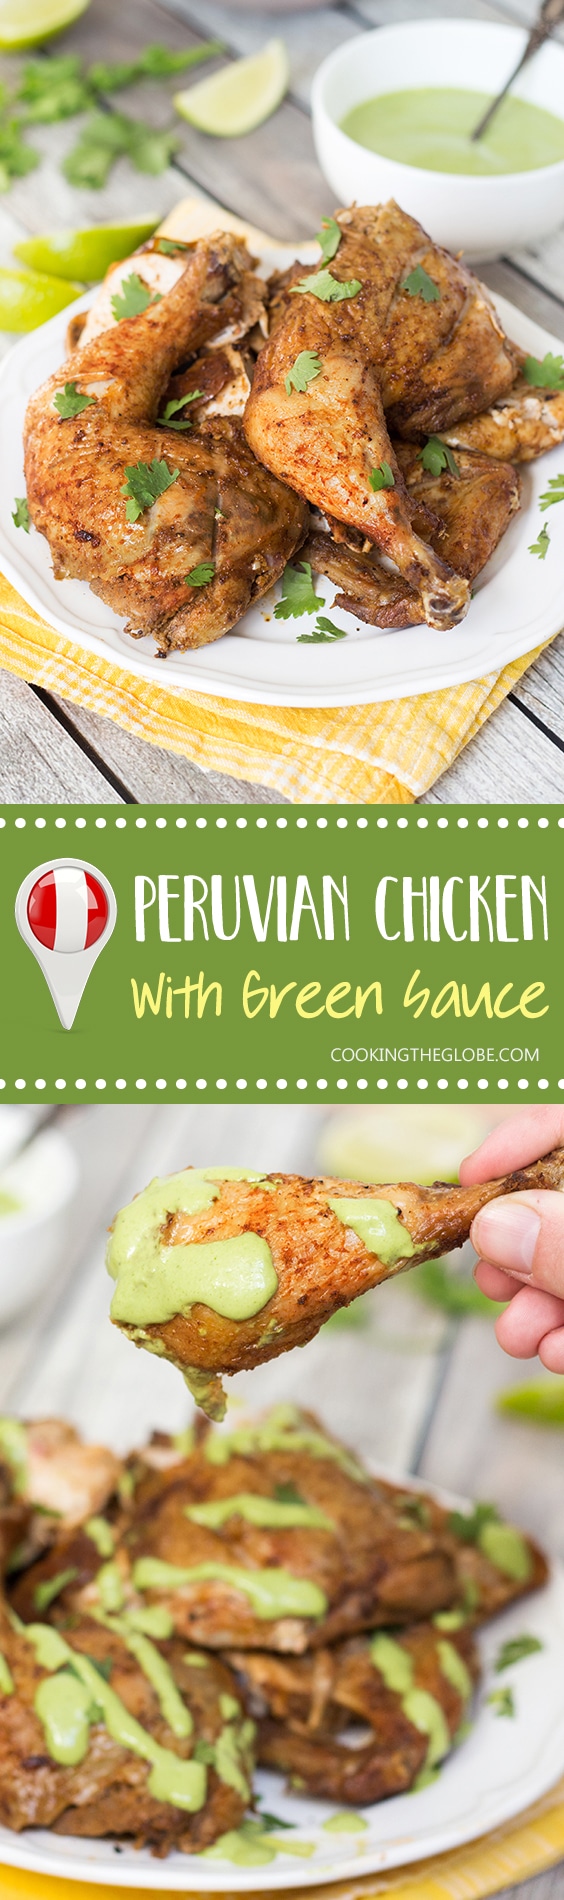 This Peruvian Chicken with a traditional Peruvian green sauce is destined to become one of your favorite chicken recipes ever!